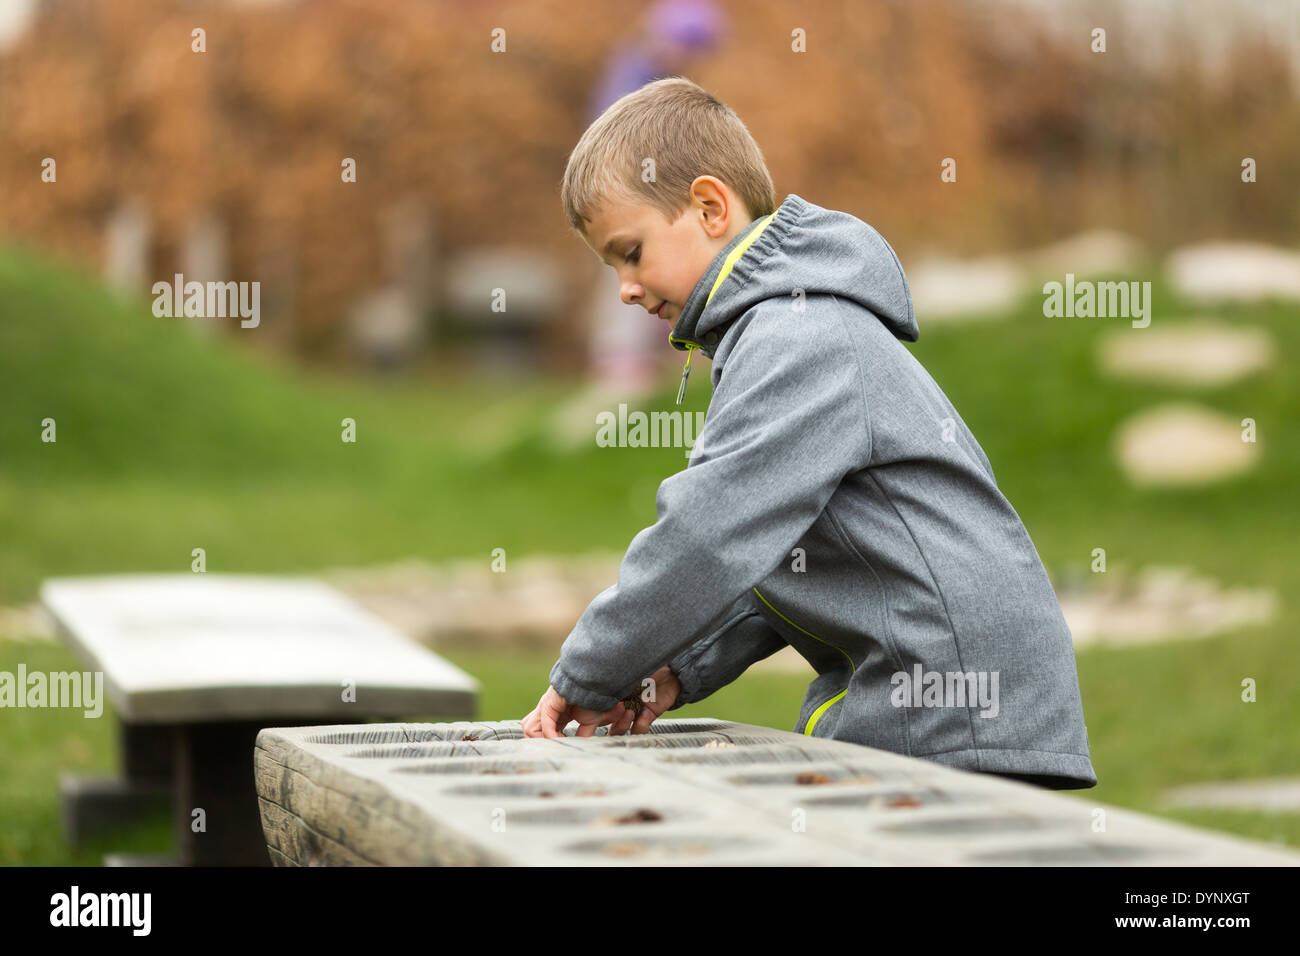 Young caucasian boy playing mancala outdoors during spring. Trademarks on jacket have been removed. Stock Photo